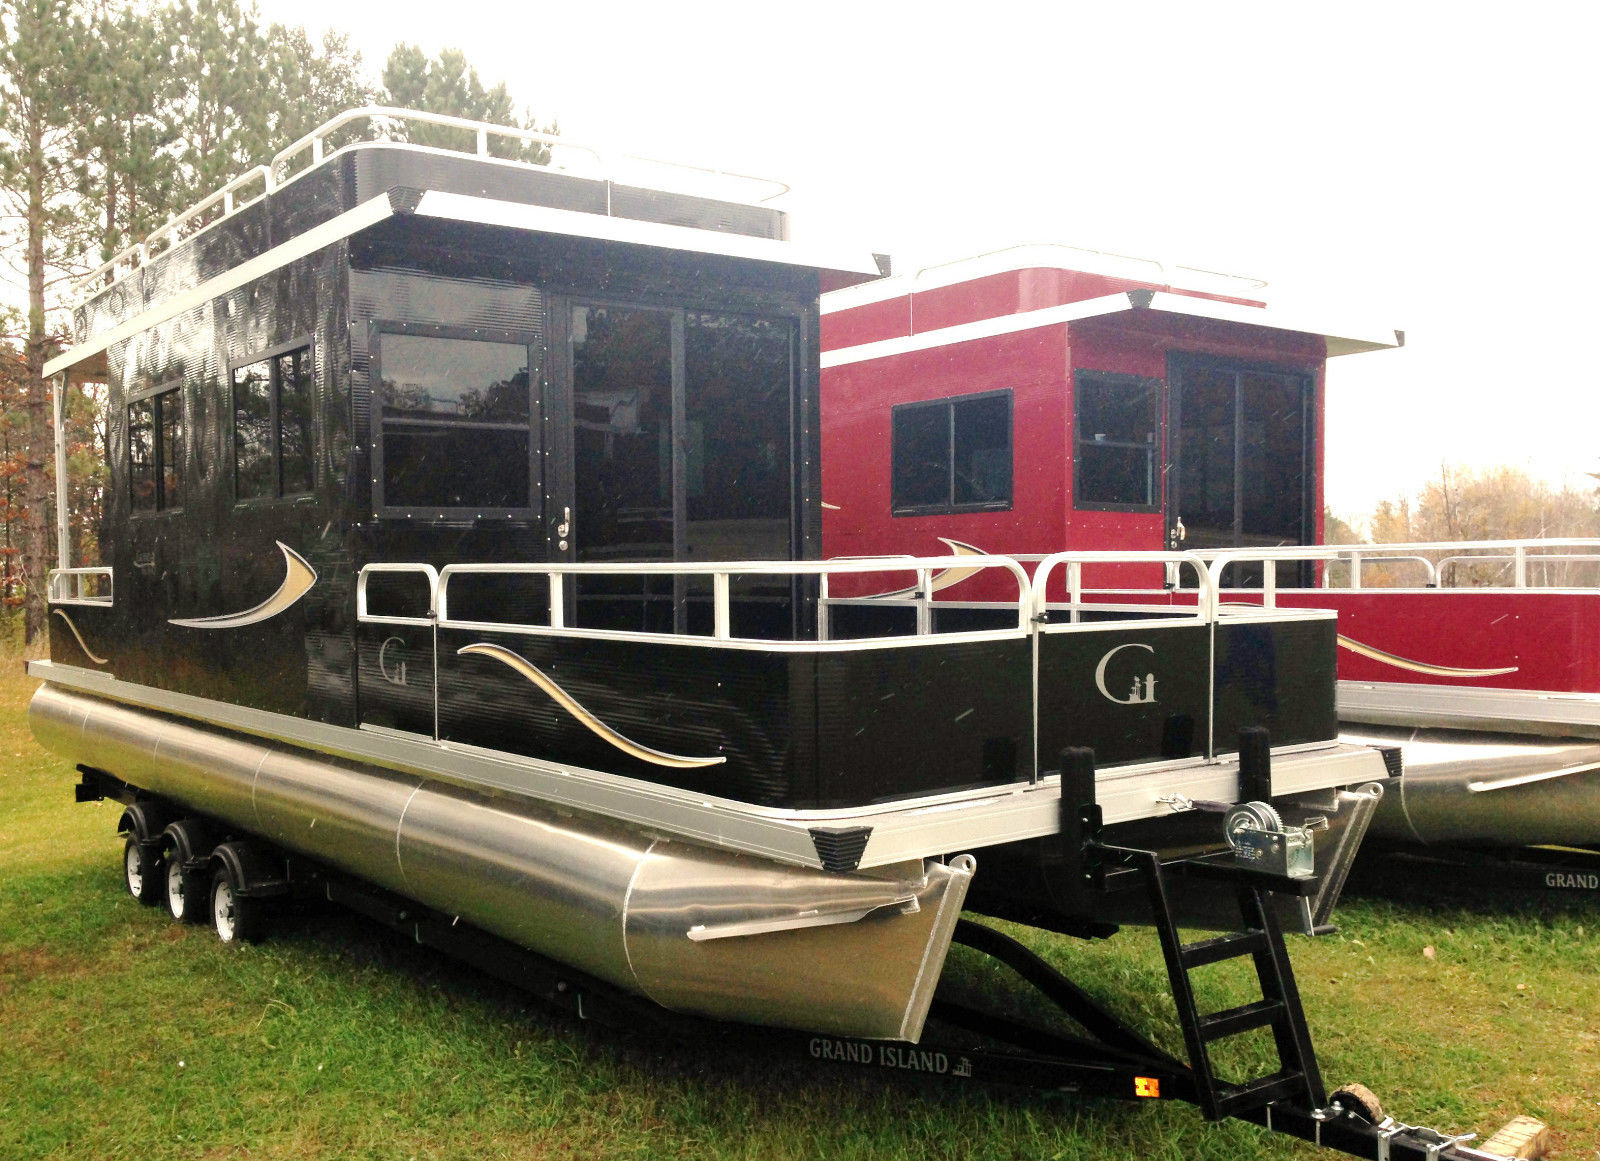 New 32 Ft House Boat 2014 for sale for $14,000 - Boats 